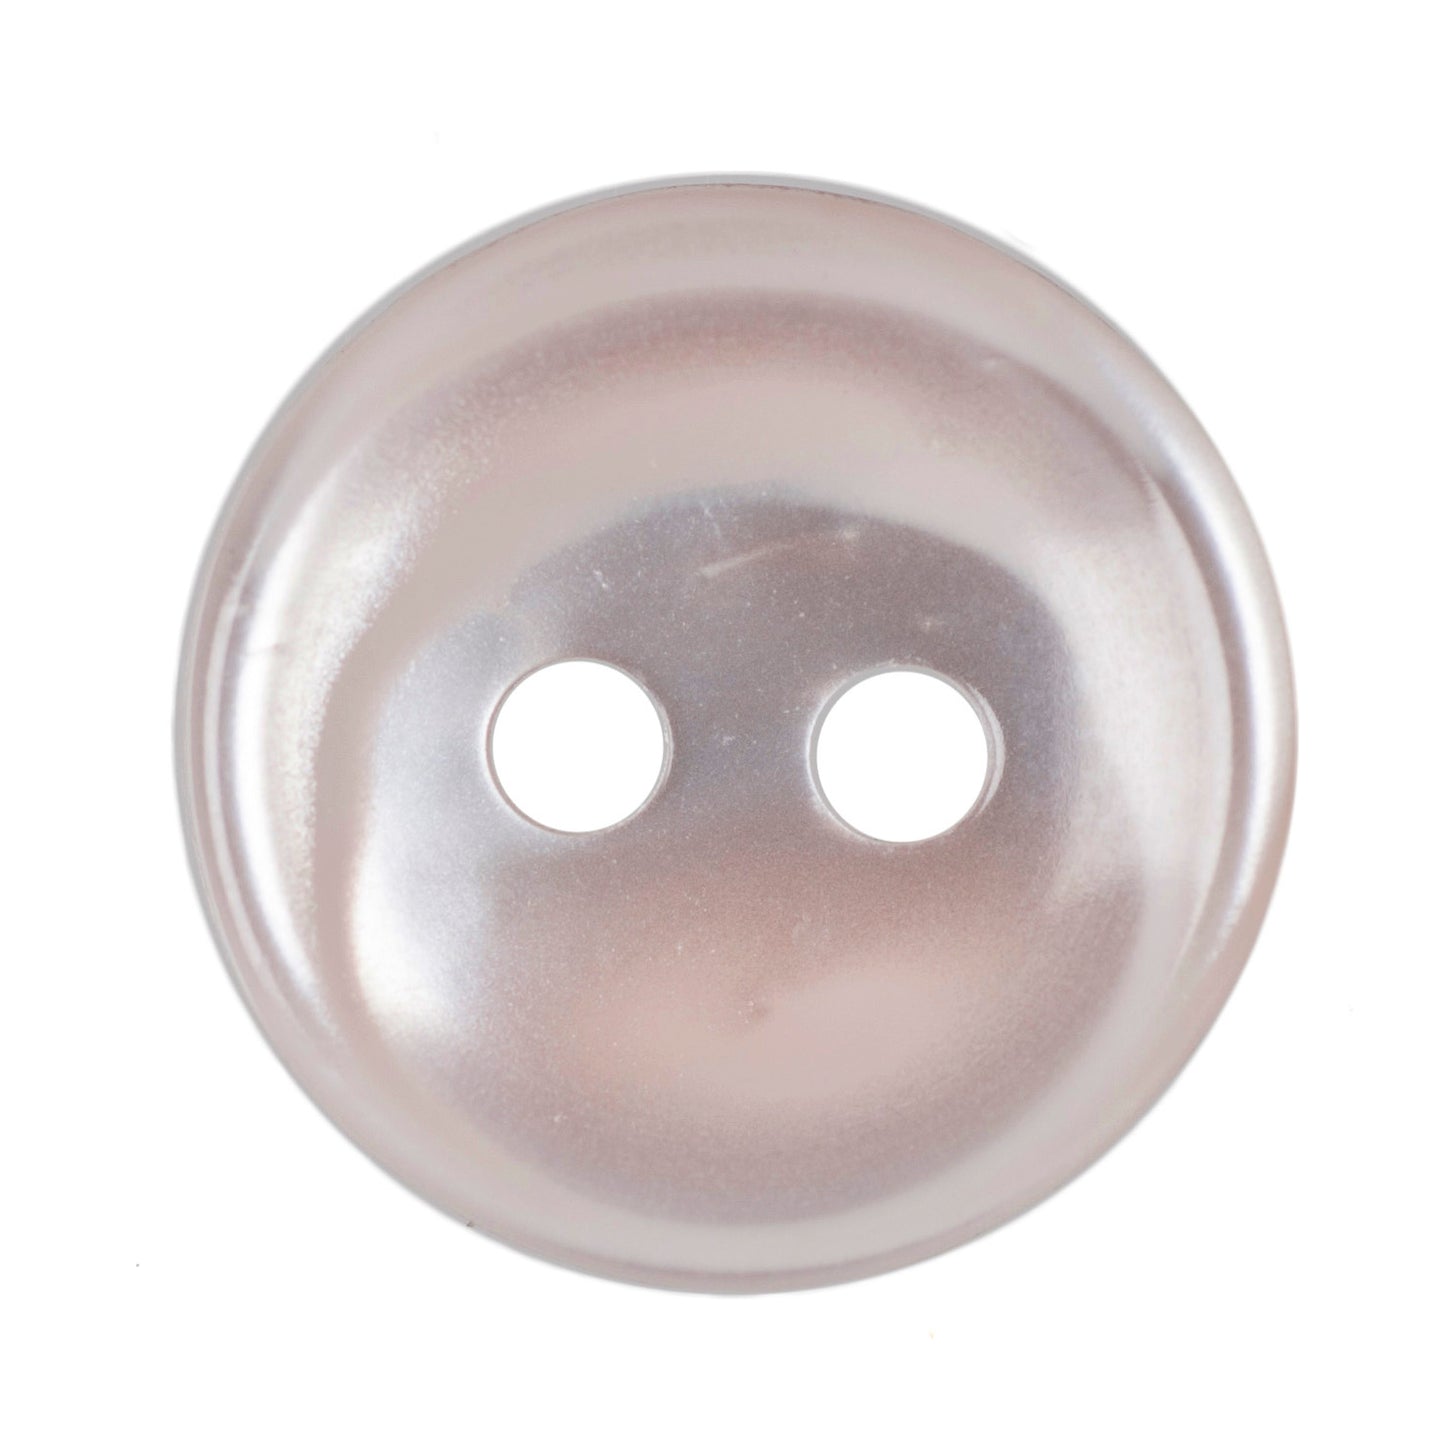 Polyester 2 Hole Stripe Buttons - 12mm - Pale Pink [LB33.7]